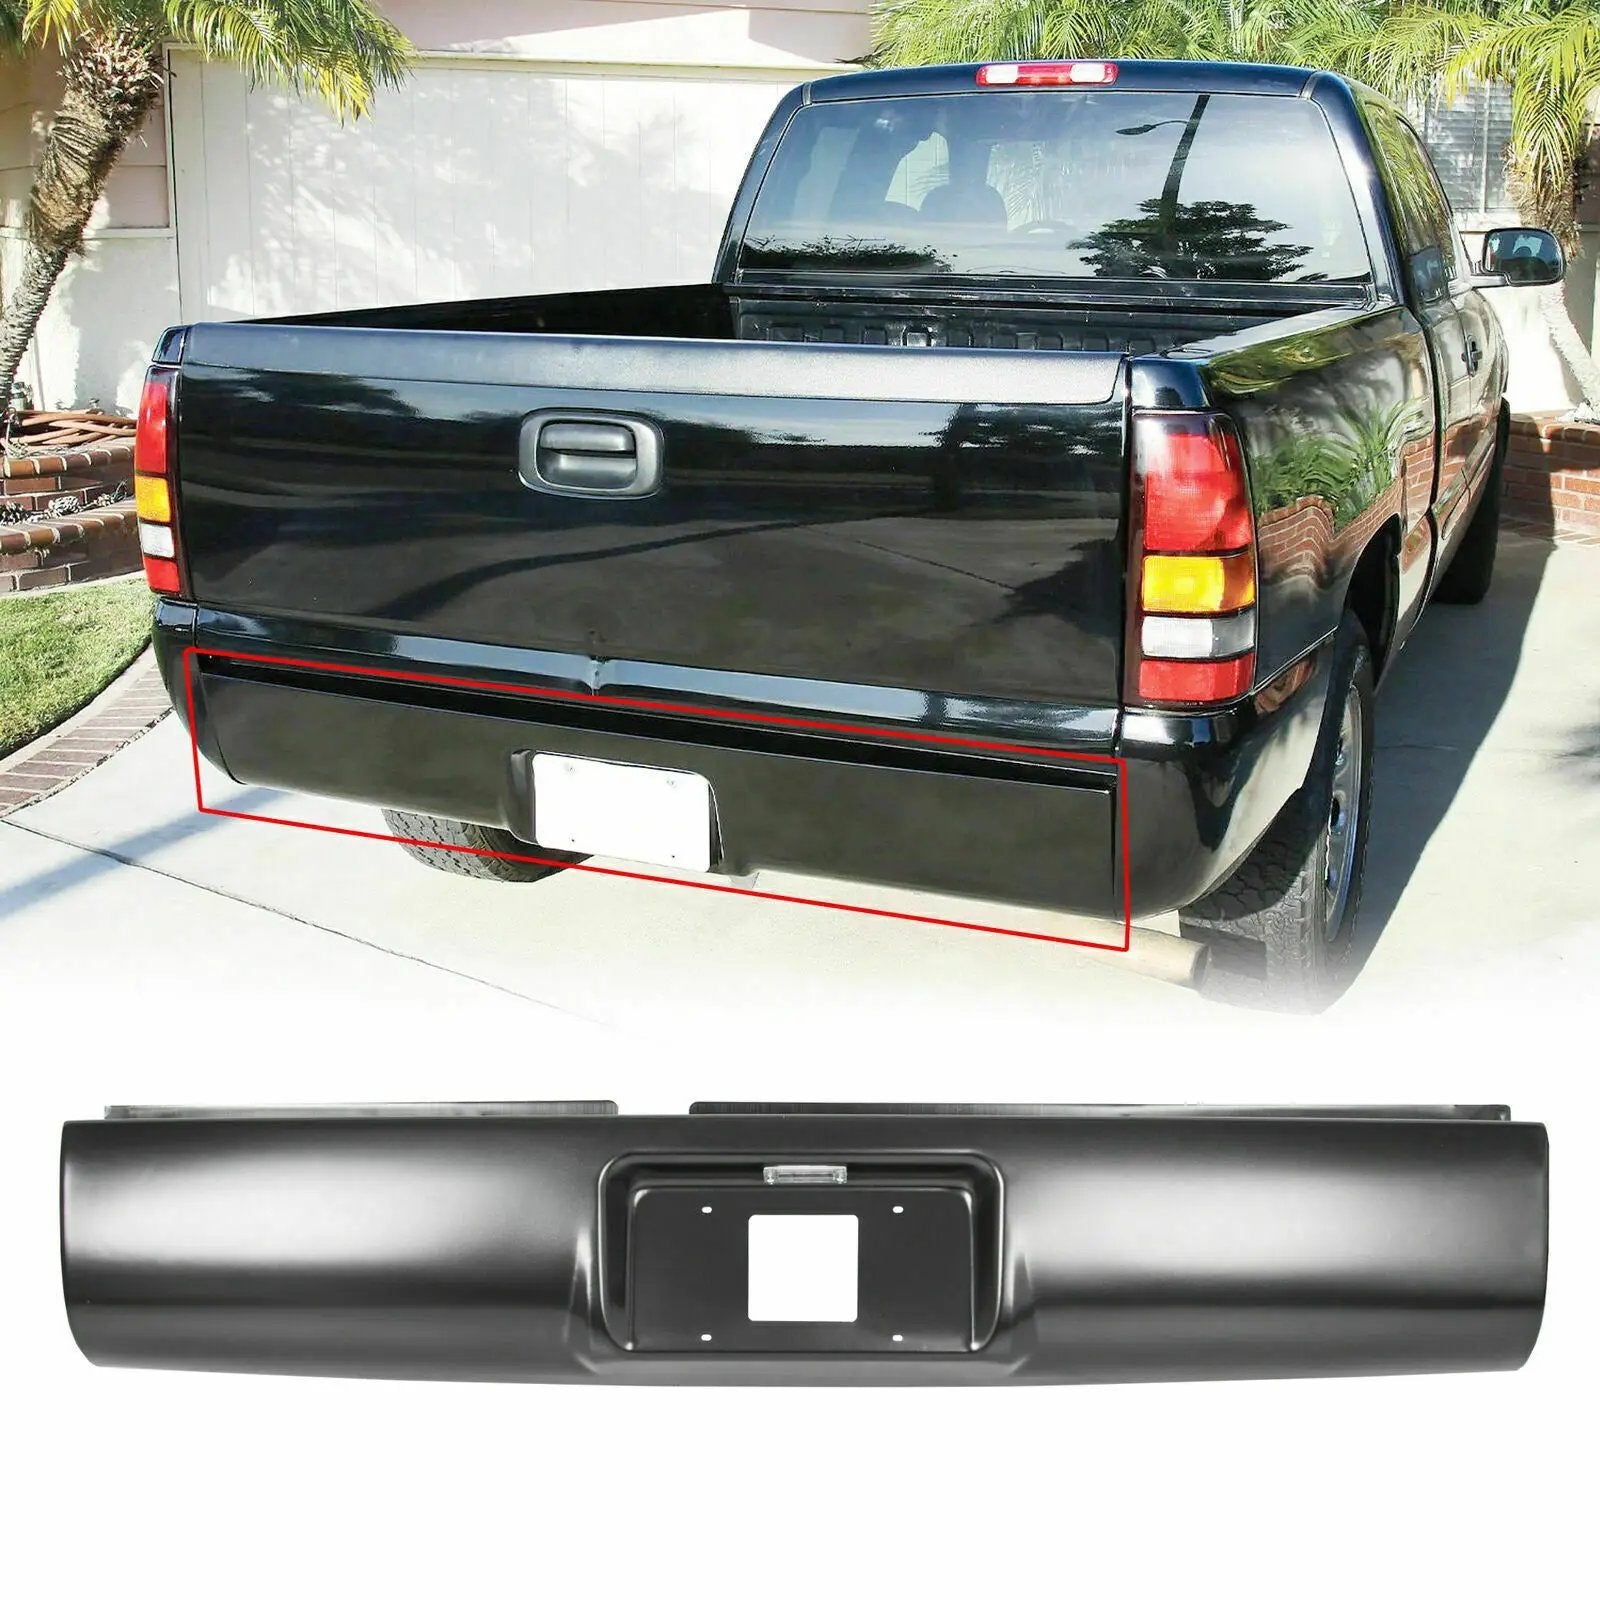 Rear Bumper Roll Pan w/LED License Lamp for 1994-2003 Chevy GMC S10 Sonoma